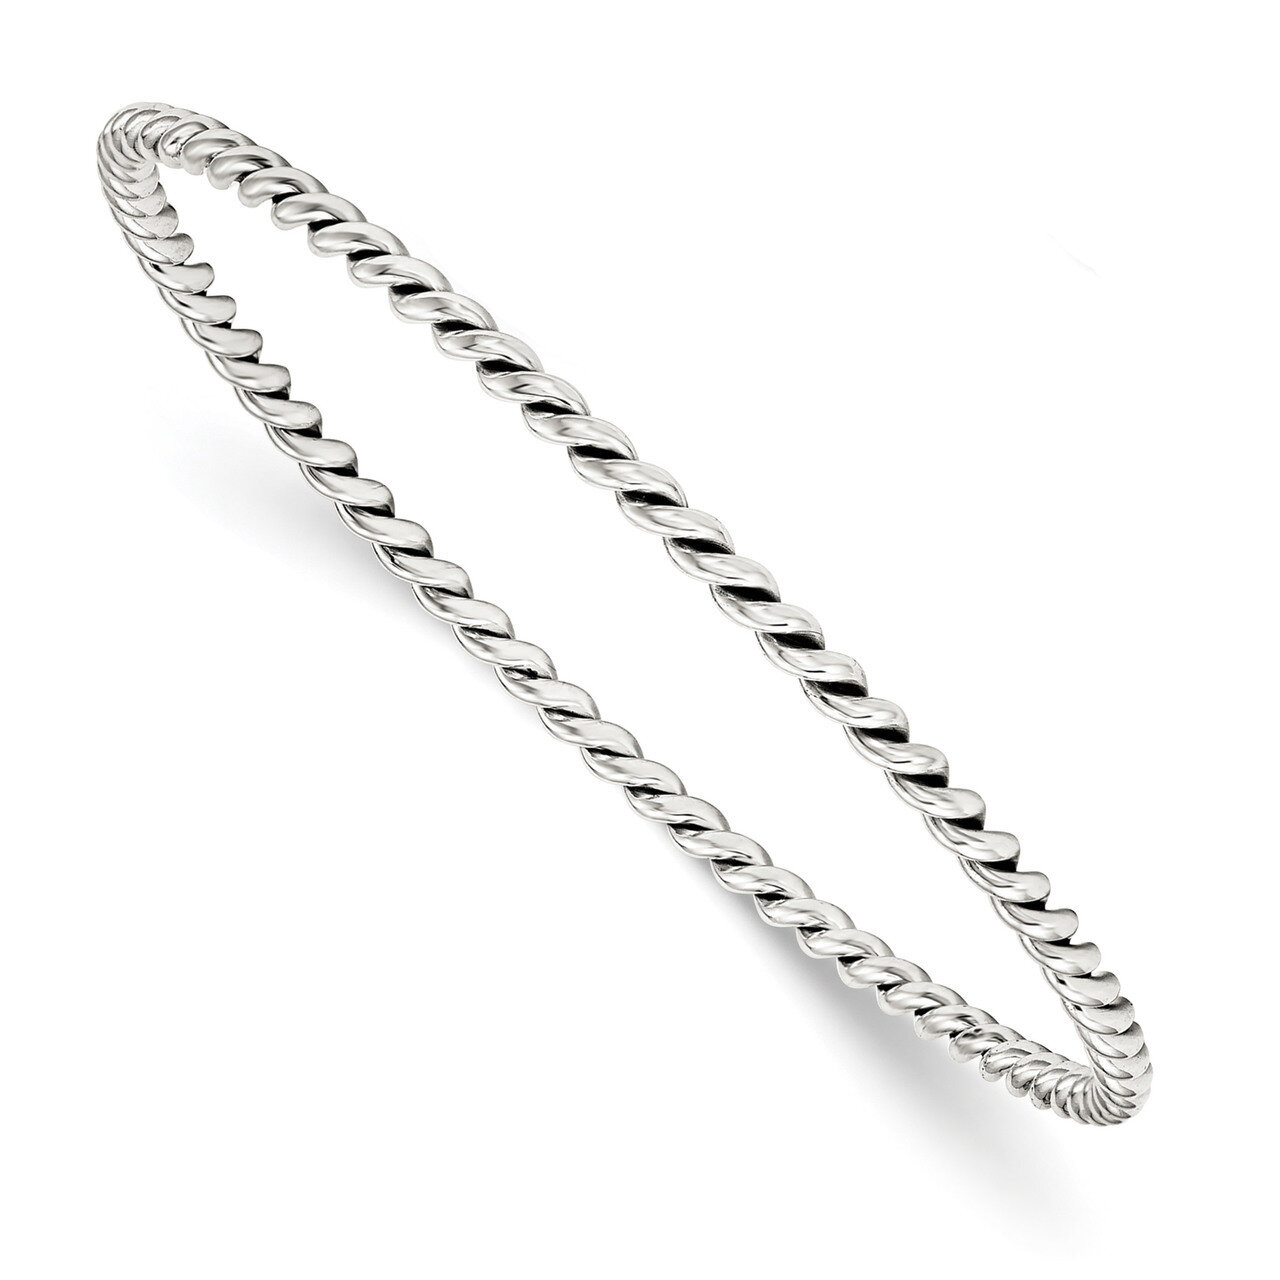 3mm Twisted Slip-on Bangle Sterling Silver Antiqued QB920